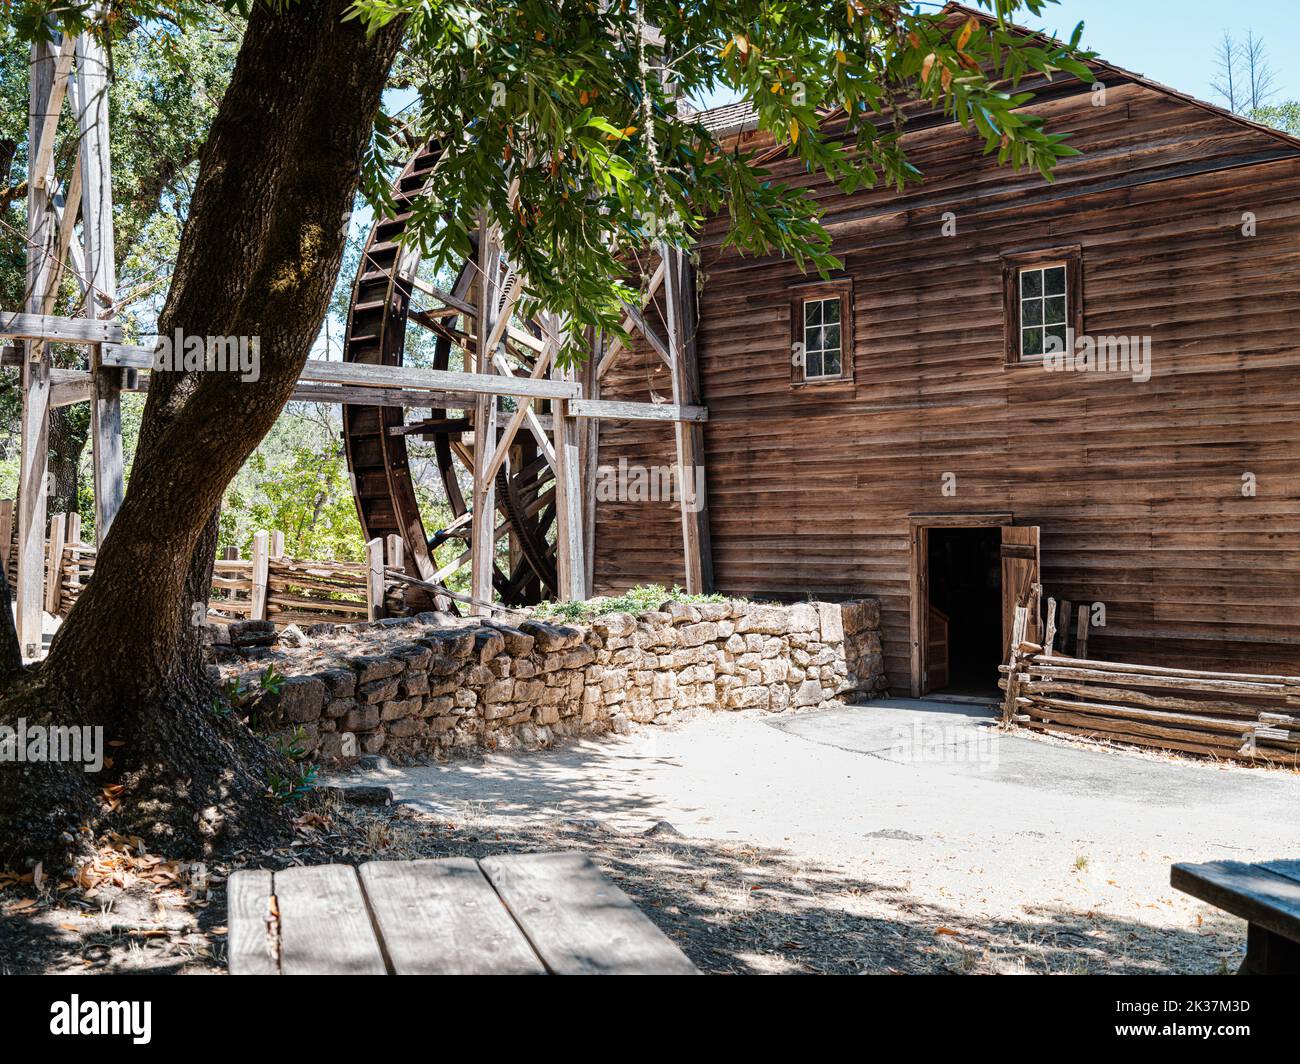 A working water mill from the 1850s in Napa Valley, California Stock Photo